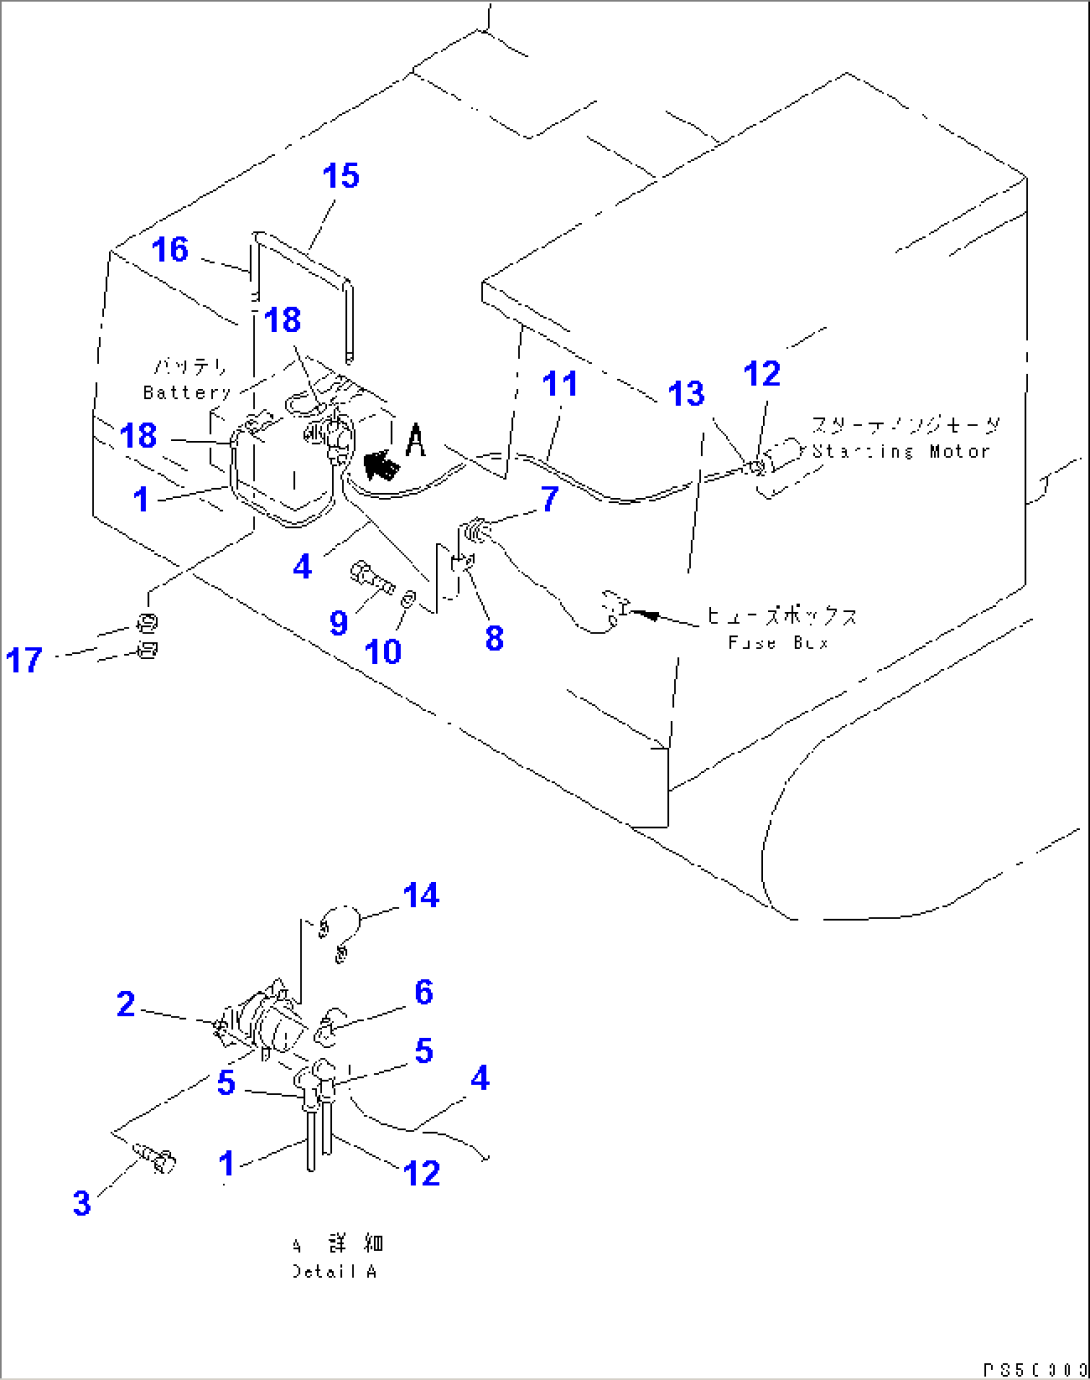 ELECTRICAL SYSTEM (BATTERY AND RELAY) (WITH AUTOMATIC SPLINKLING SYSTEM)(#1016-)